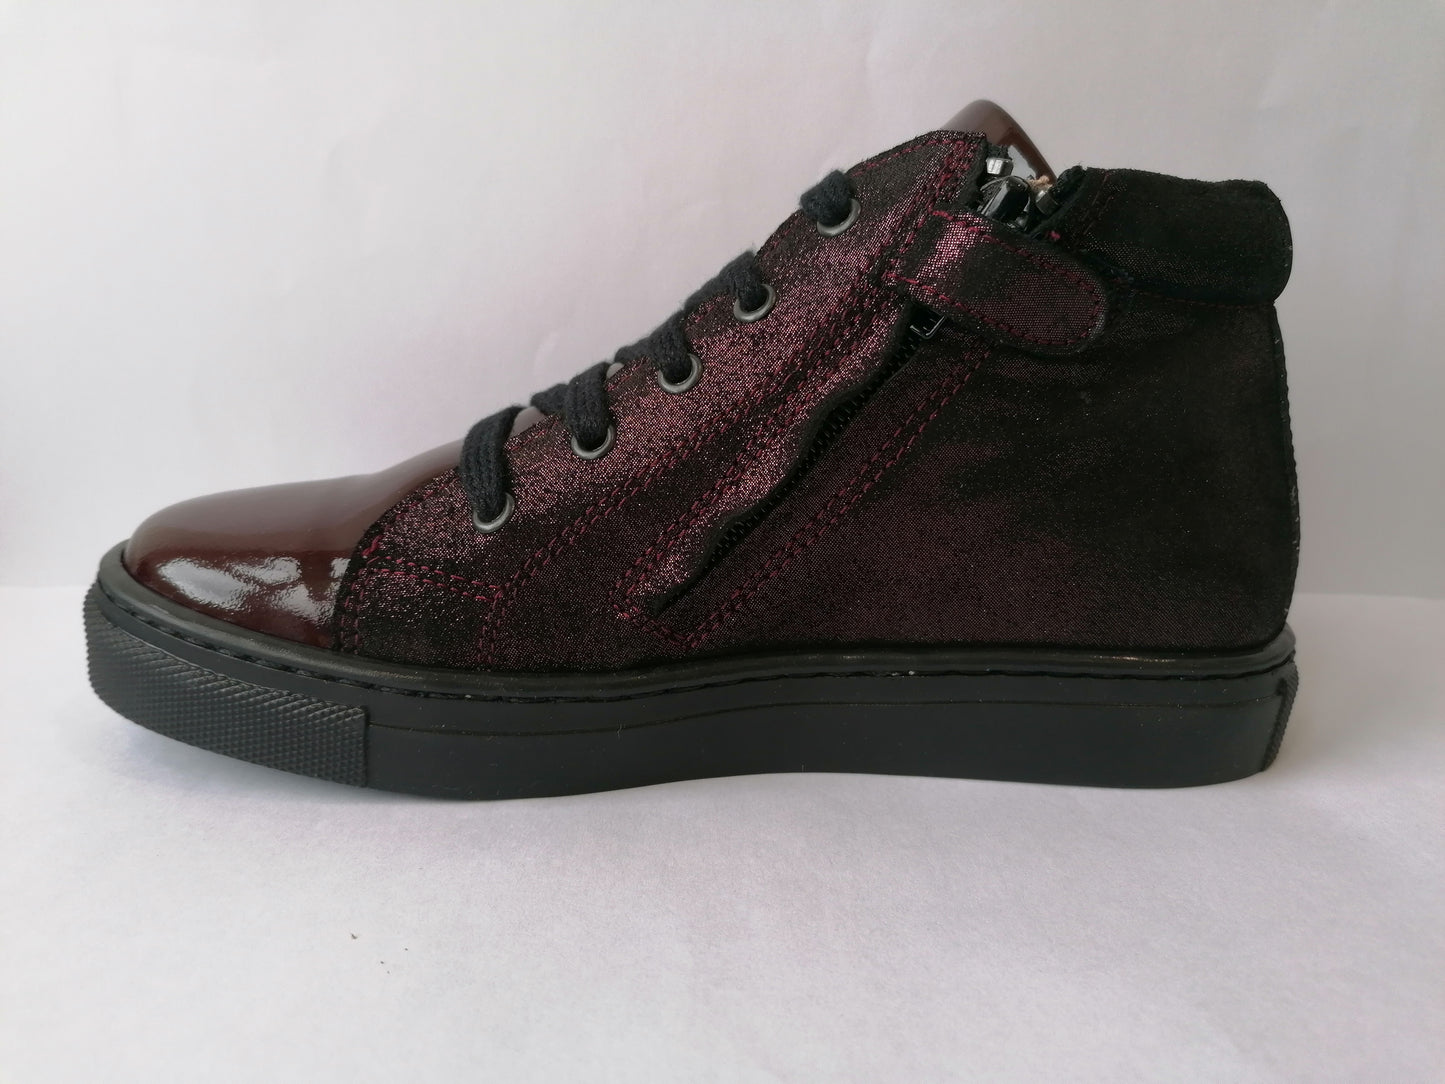 A girls casual boot by Petasil, style Gracie 2, in burgundy patent and glitter nubuck with lace and zip fastening. Left side view.